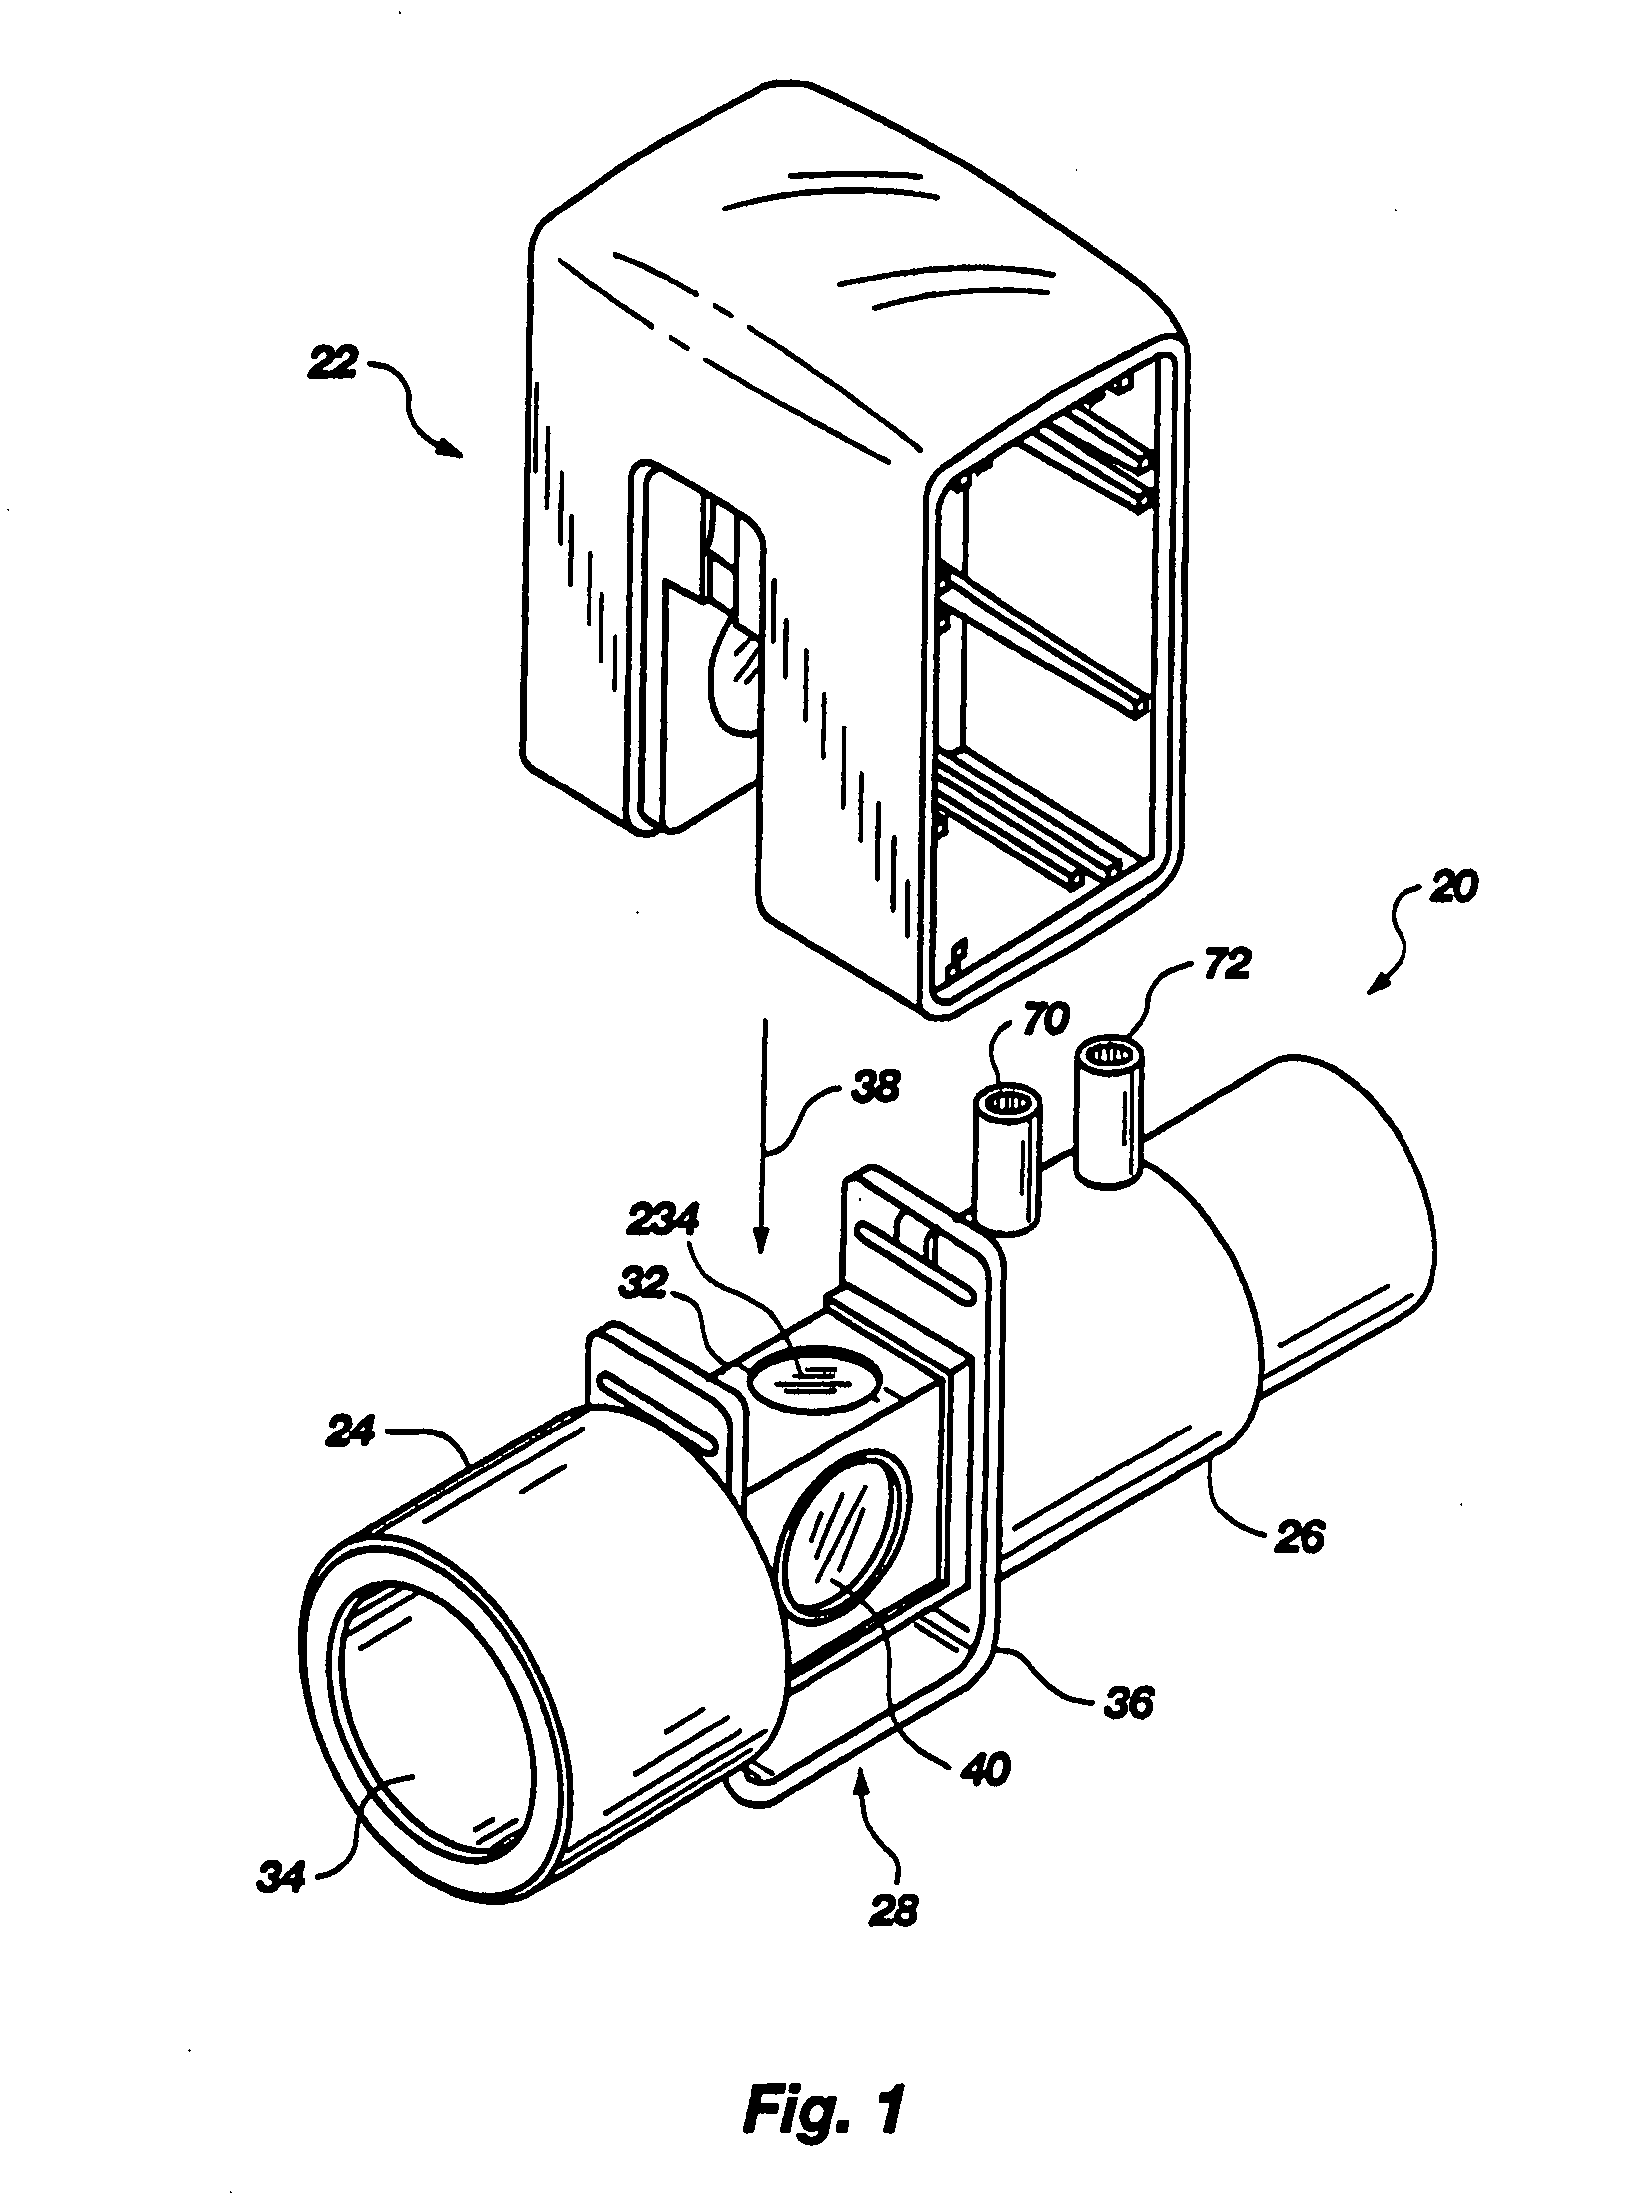 Metabolic measurements system including a multiple function airway adapter